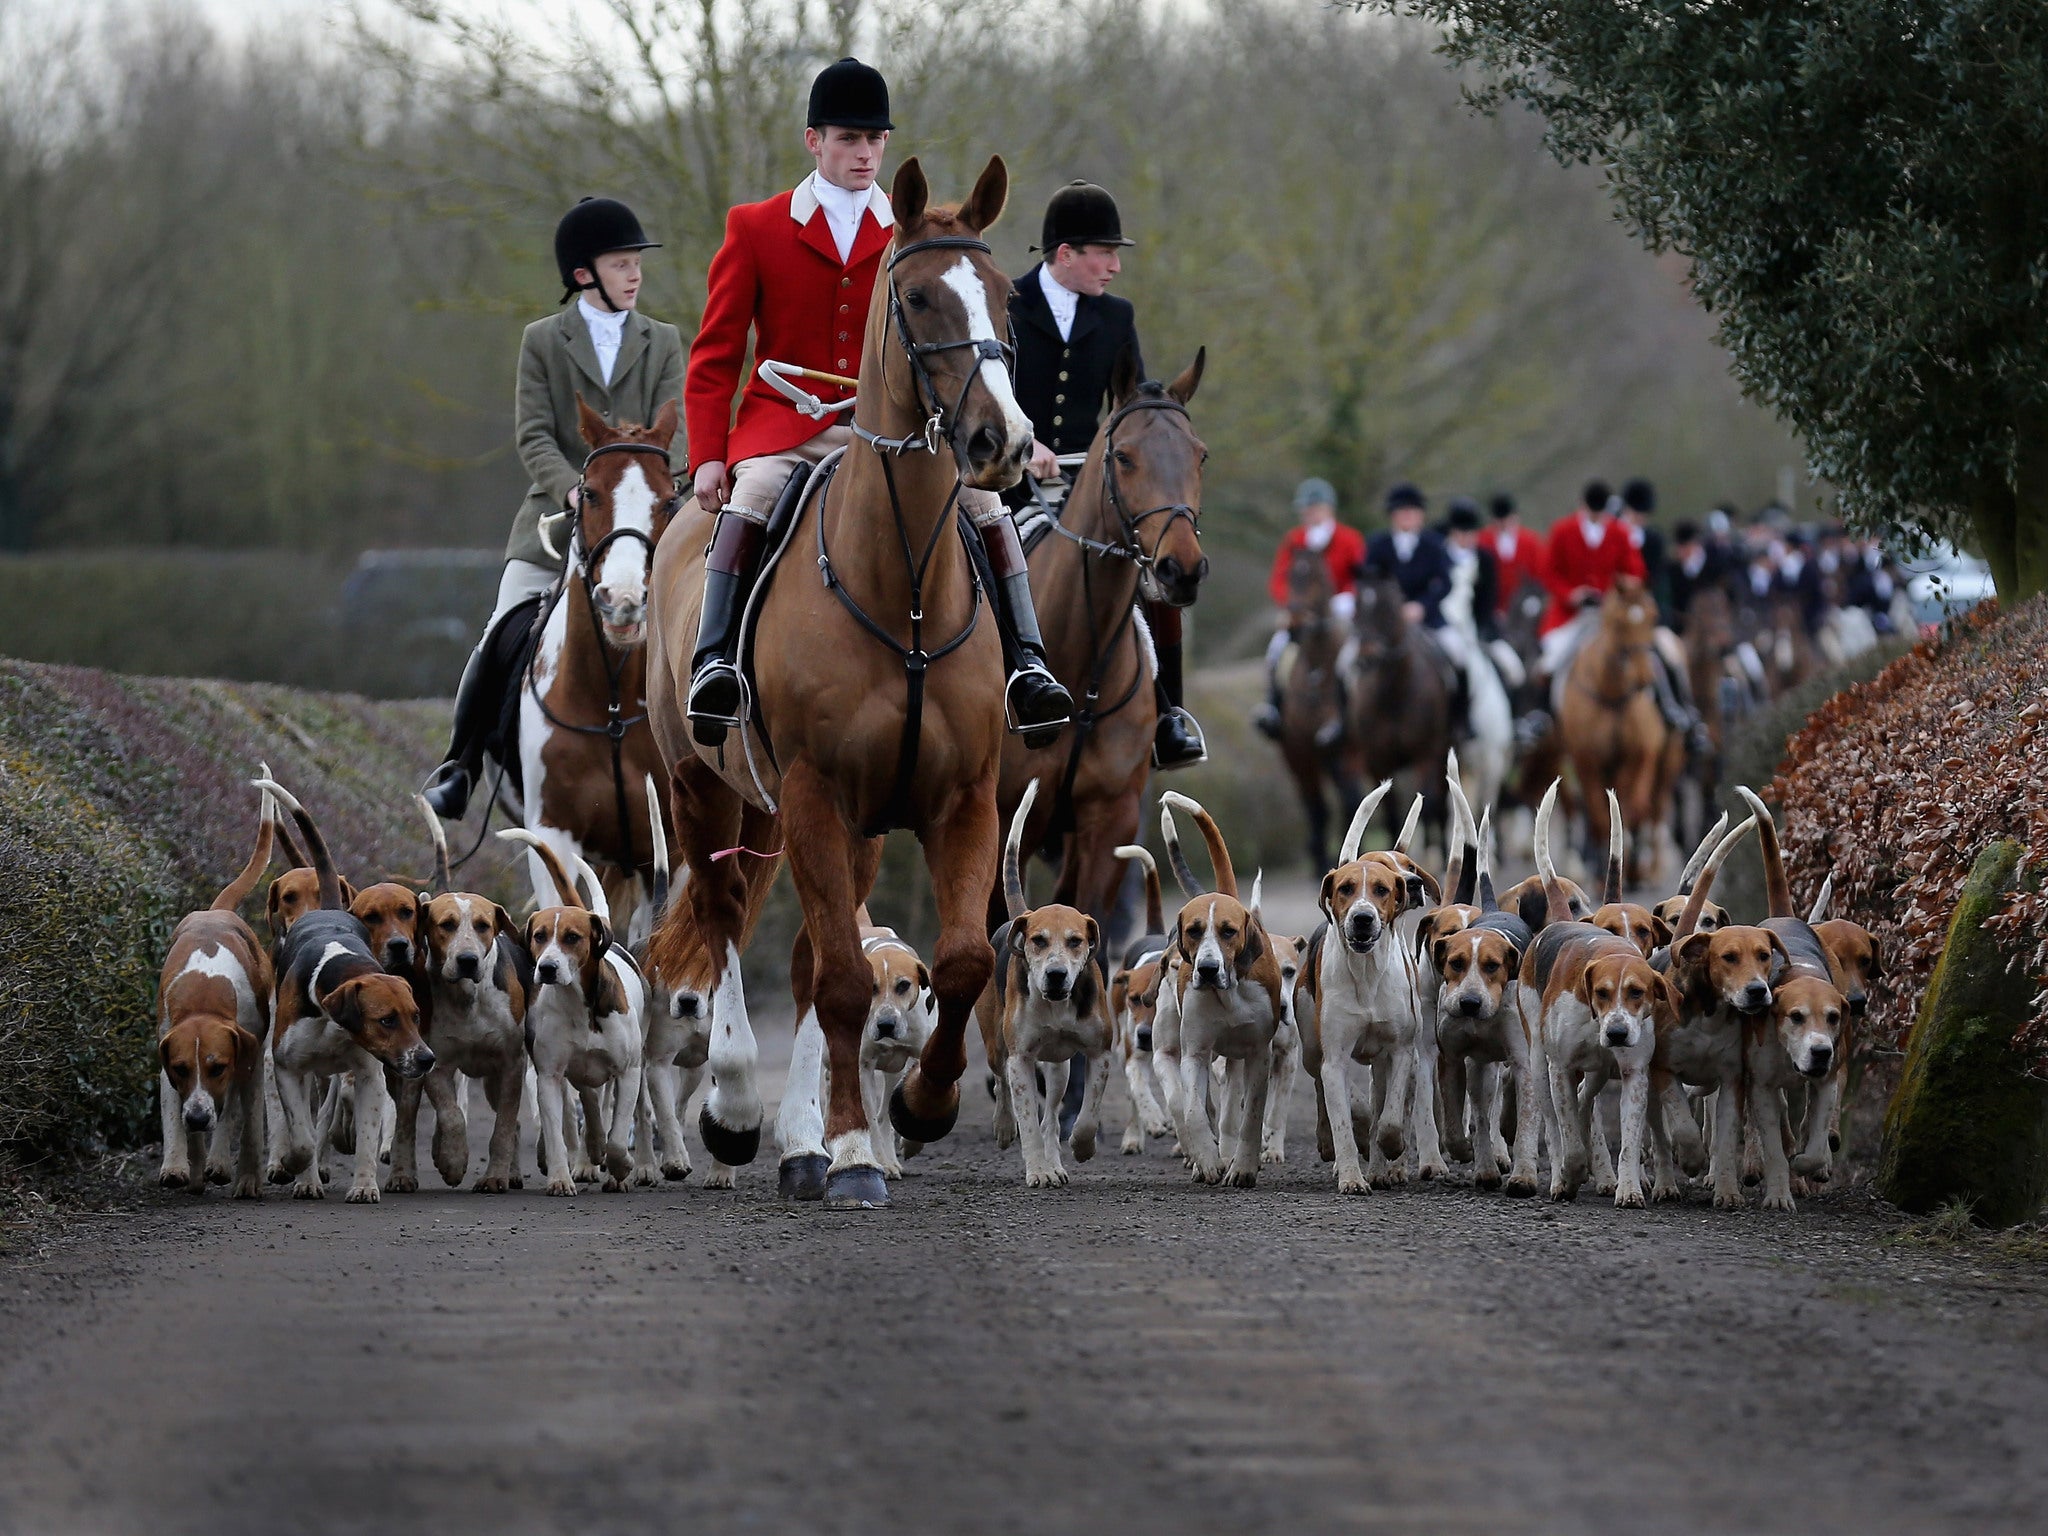 The hounds of the Atherstone Hunt